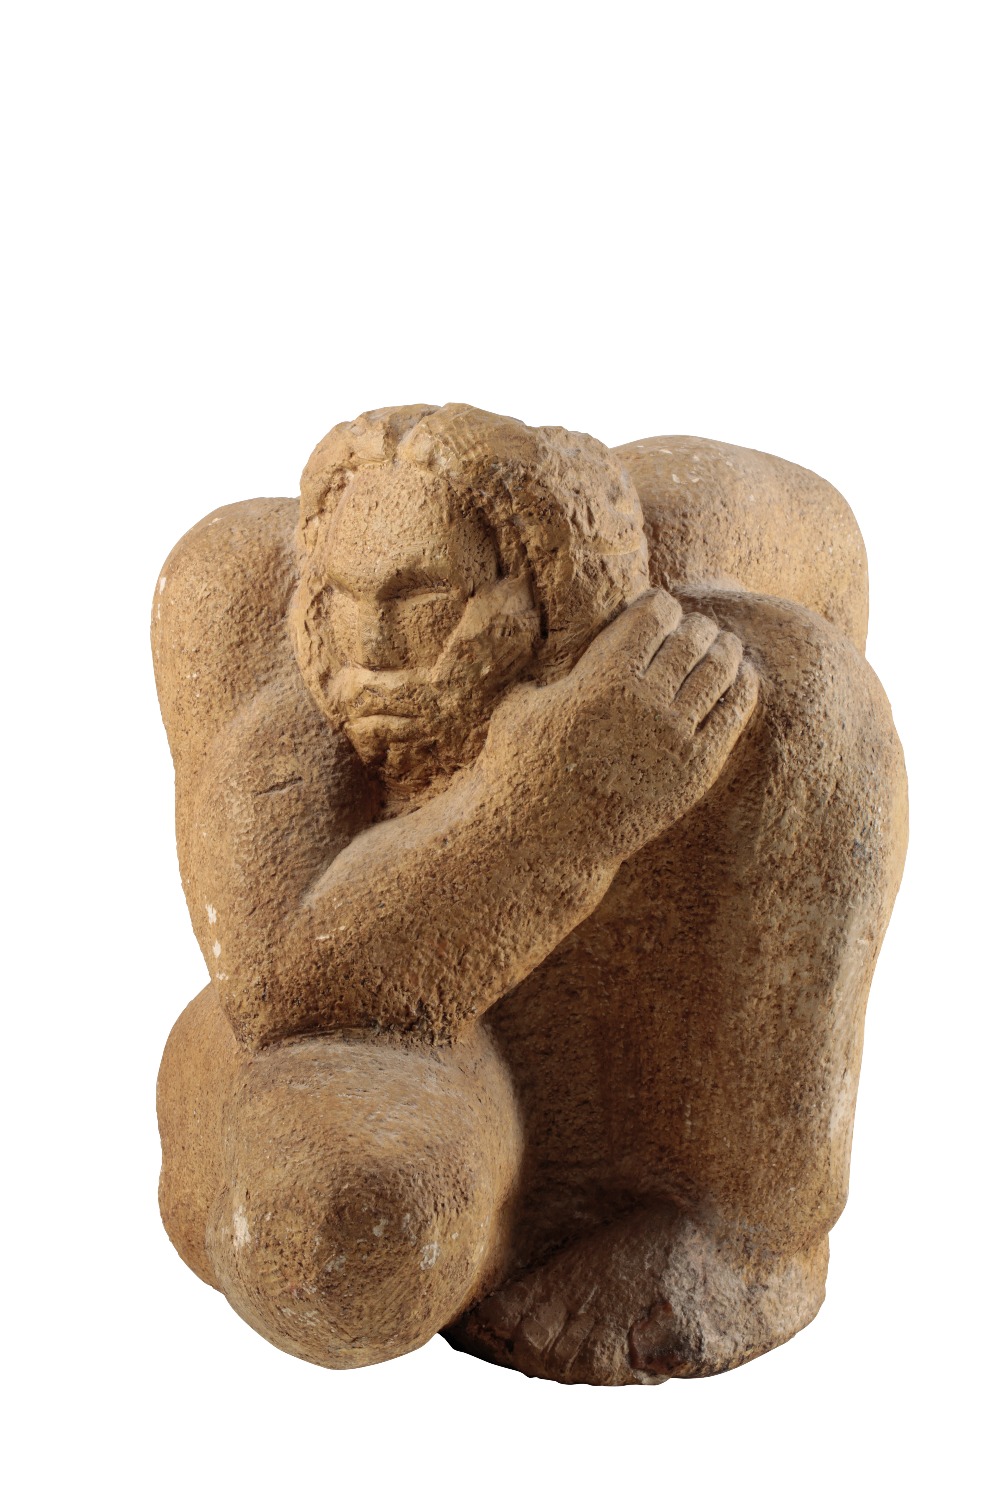 MARBLE STONE SCULPTURE, modelled in the form of a kneeling figure